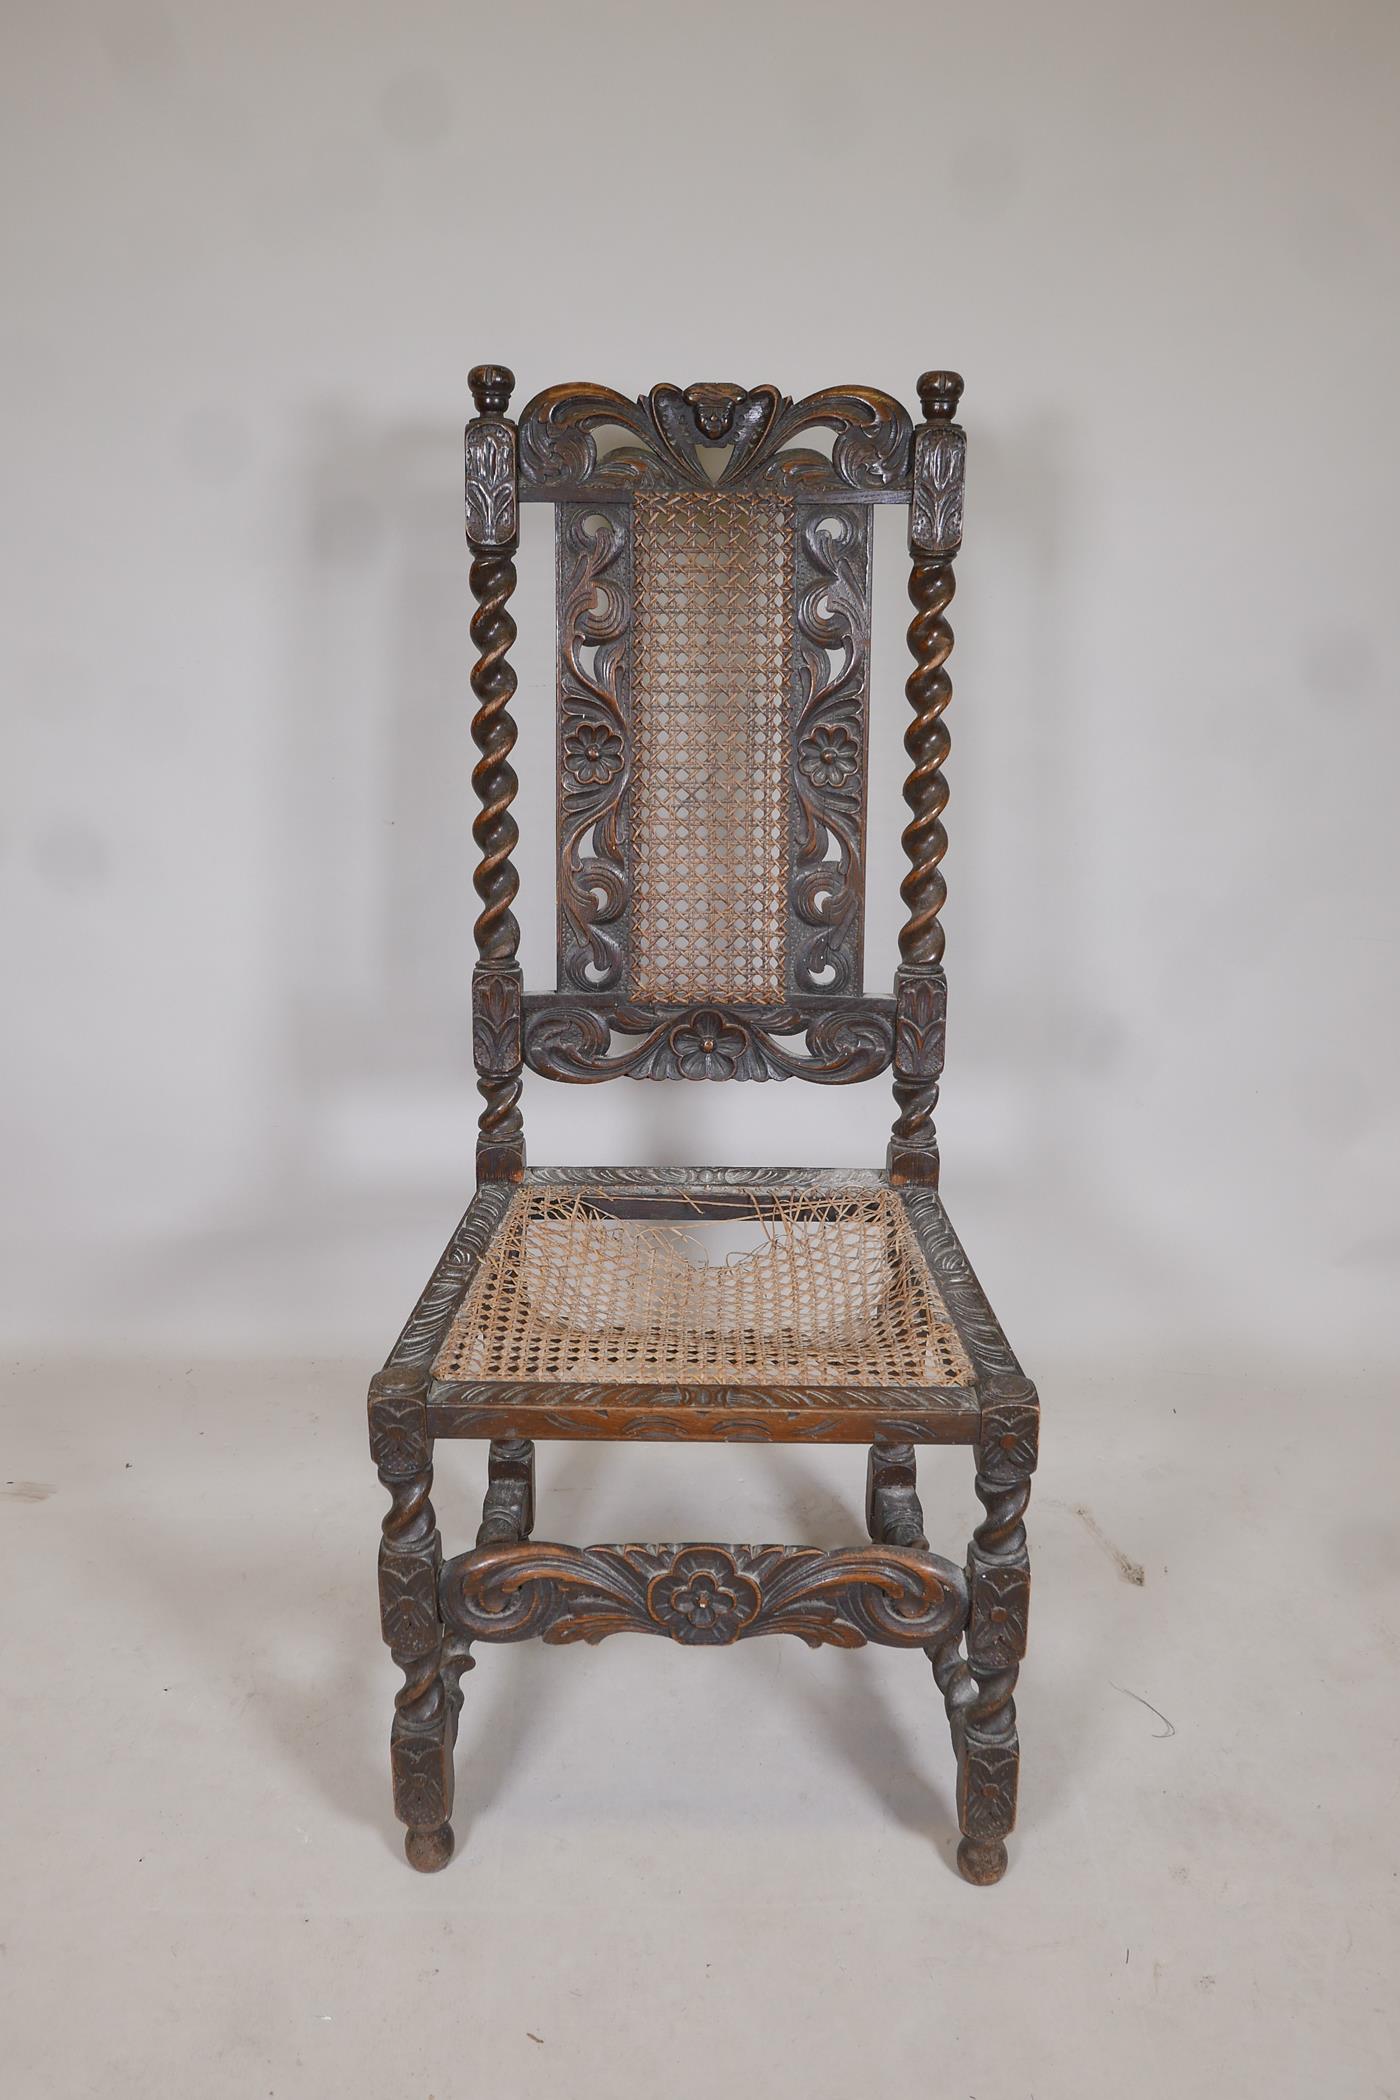 A late C18th/early C19th oak barleytwist chair with a cane seat and back, and carved floral details, - Image 2 of 4